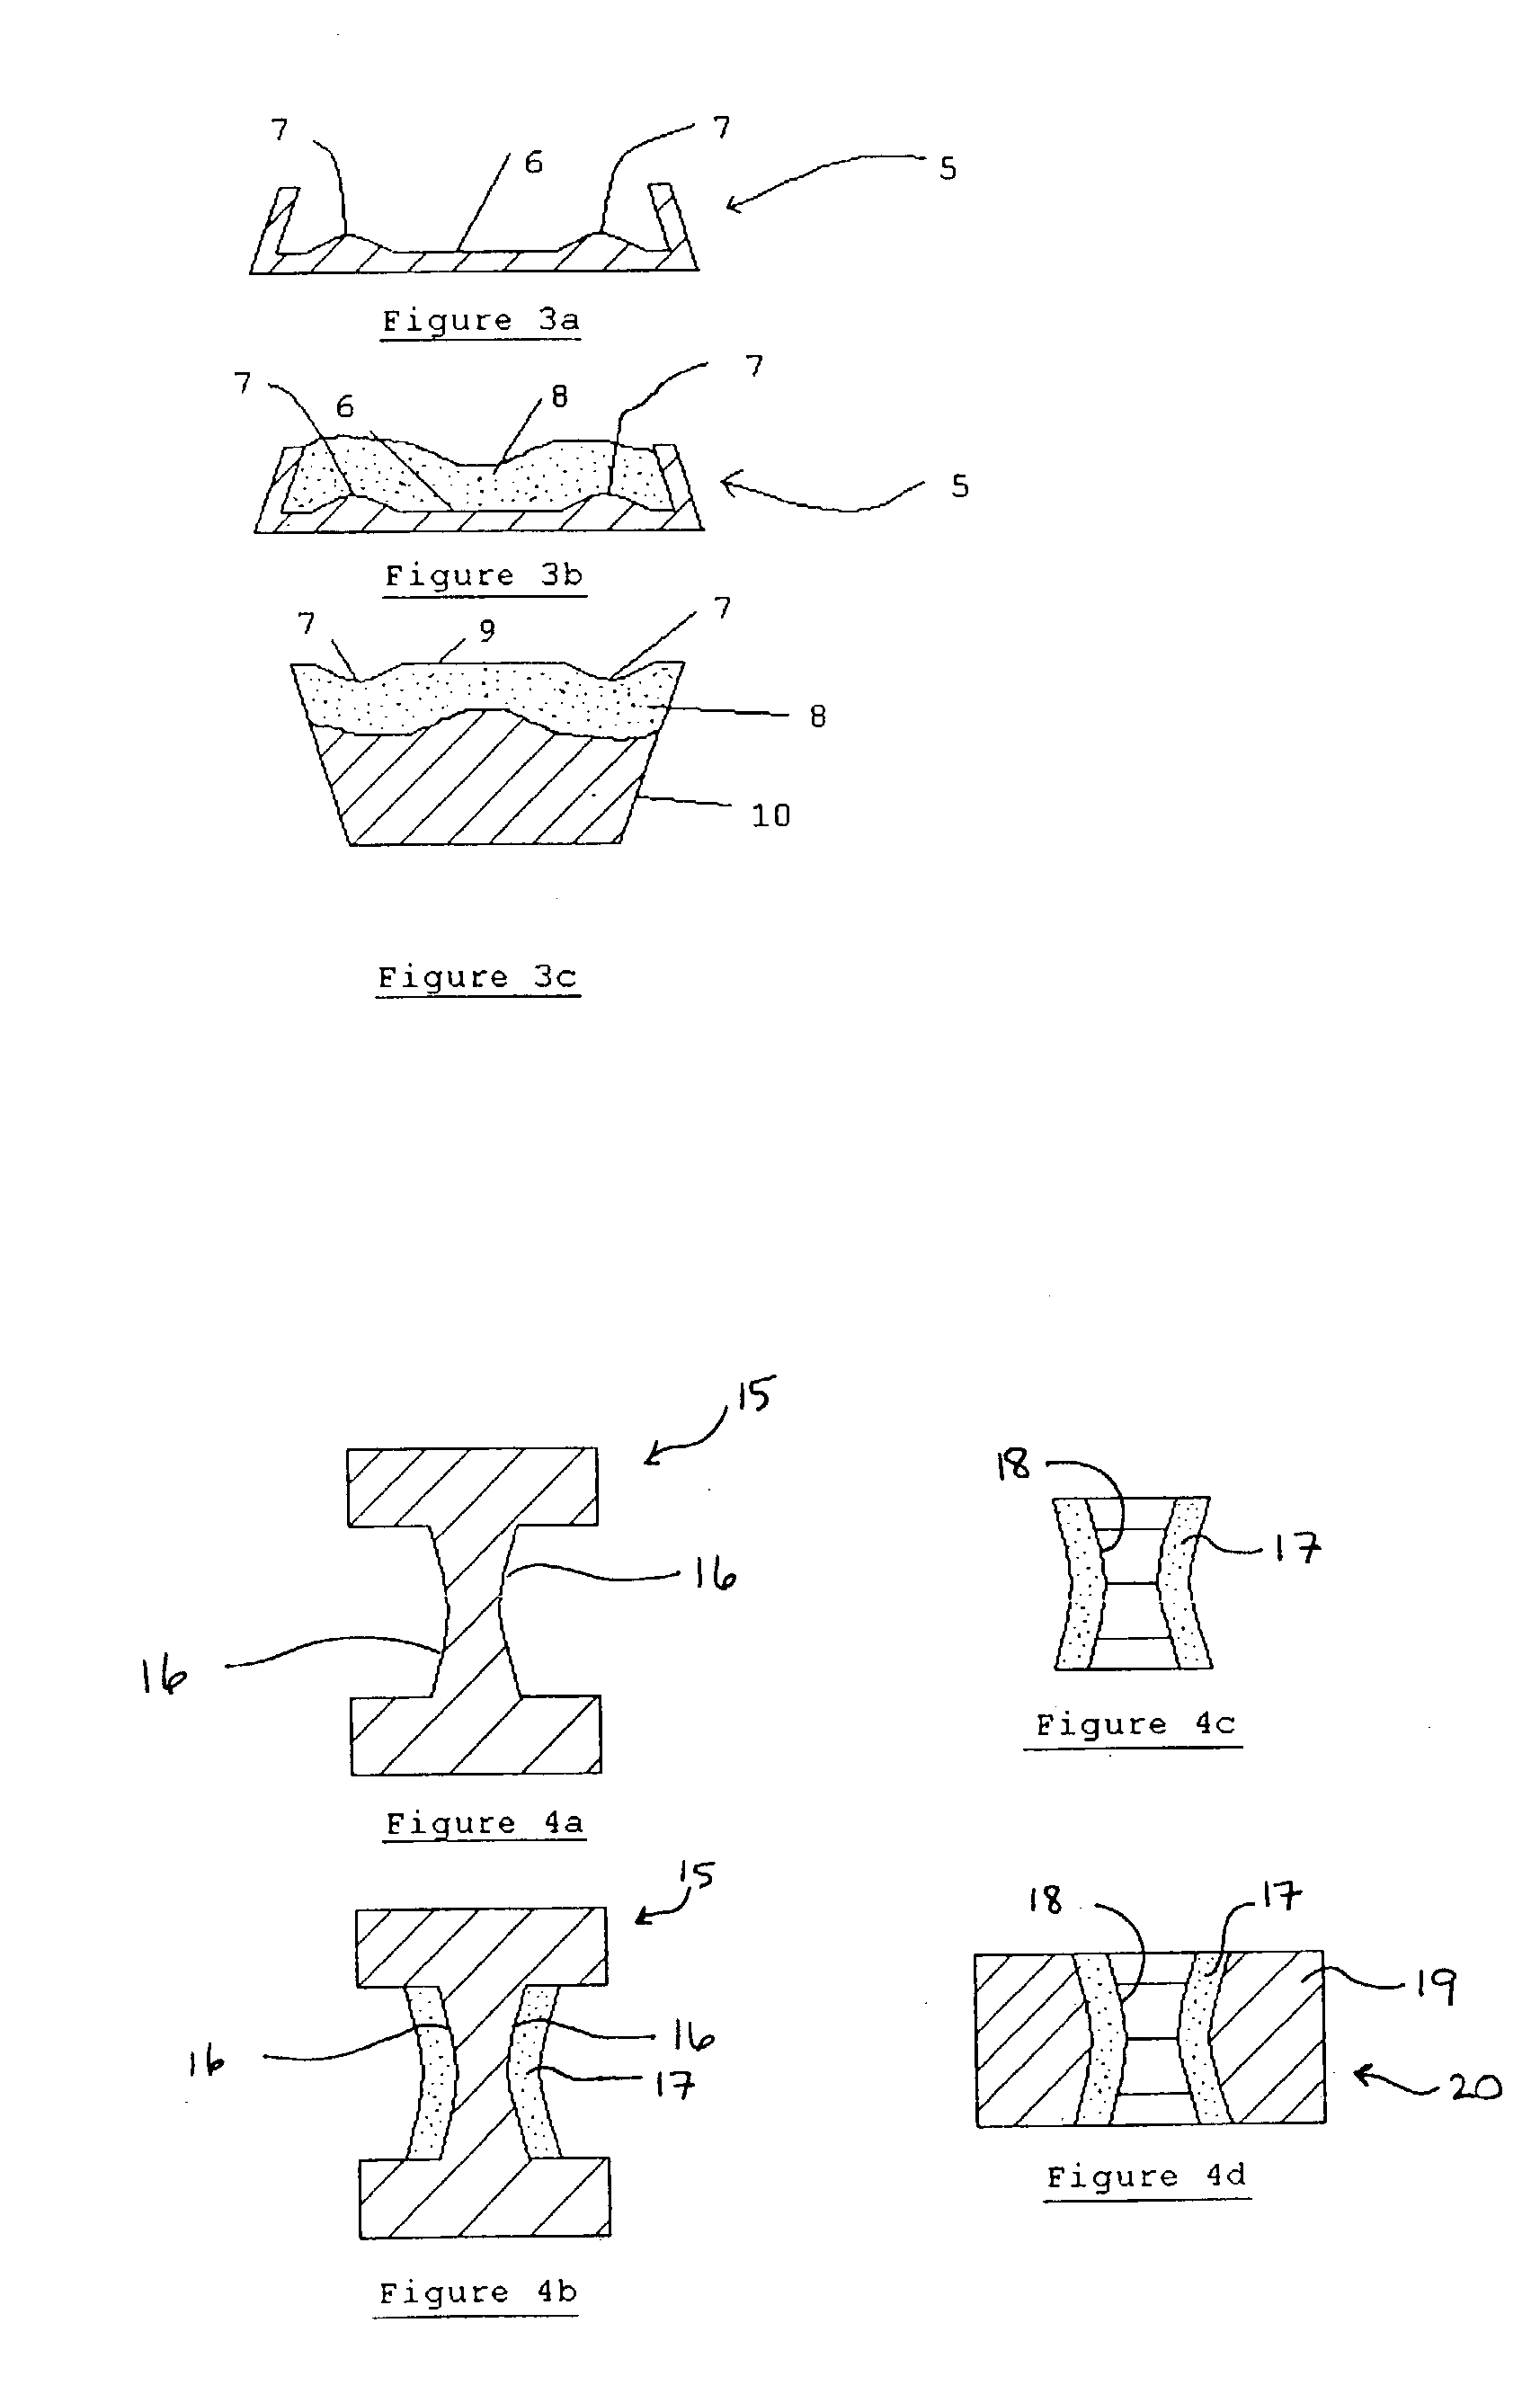 Cast diamond products and formation thereof by chemical vapor deposition